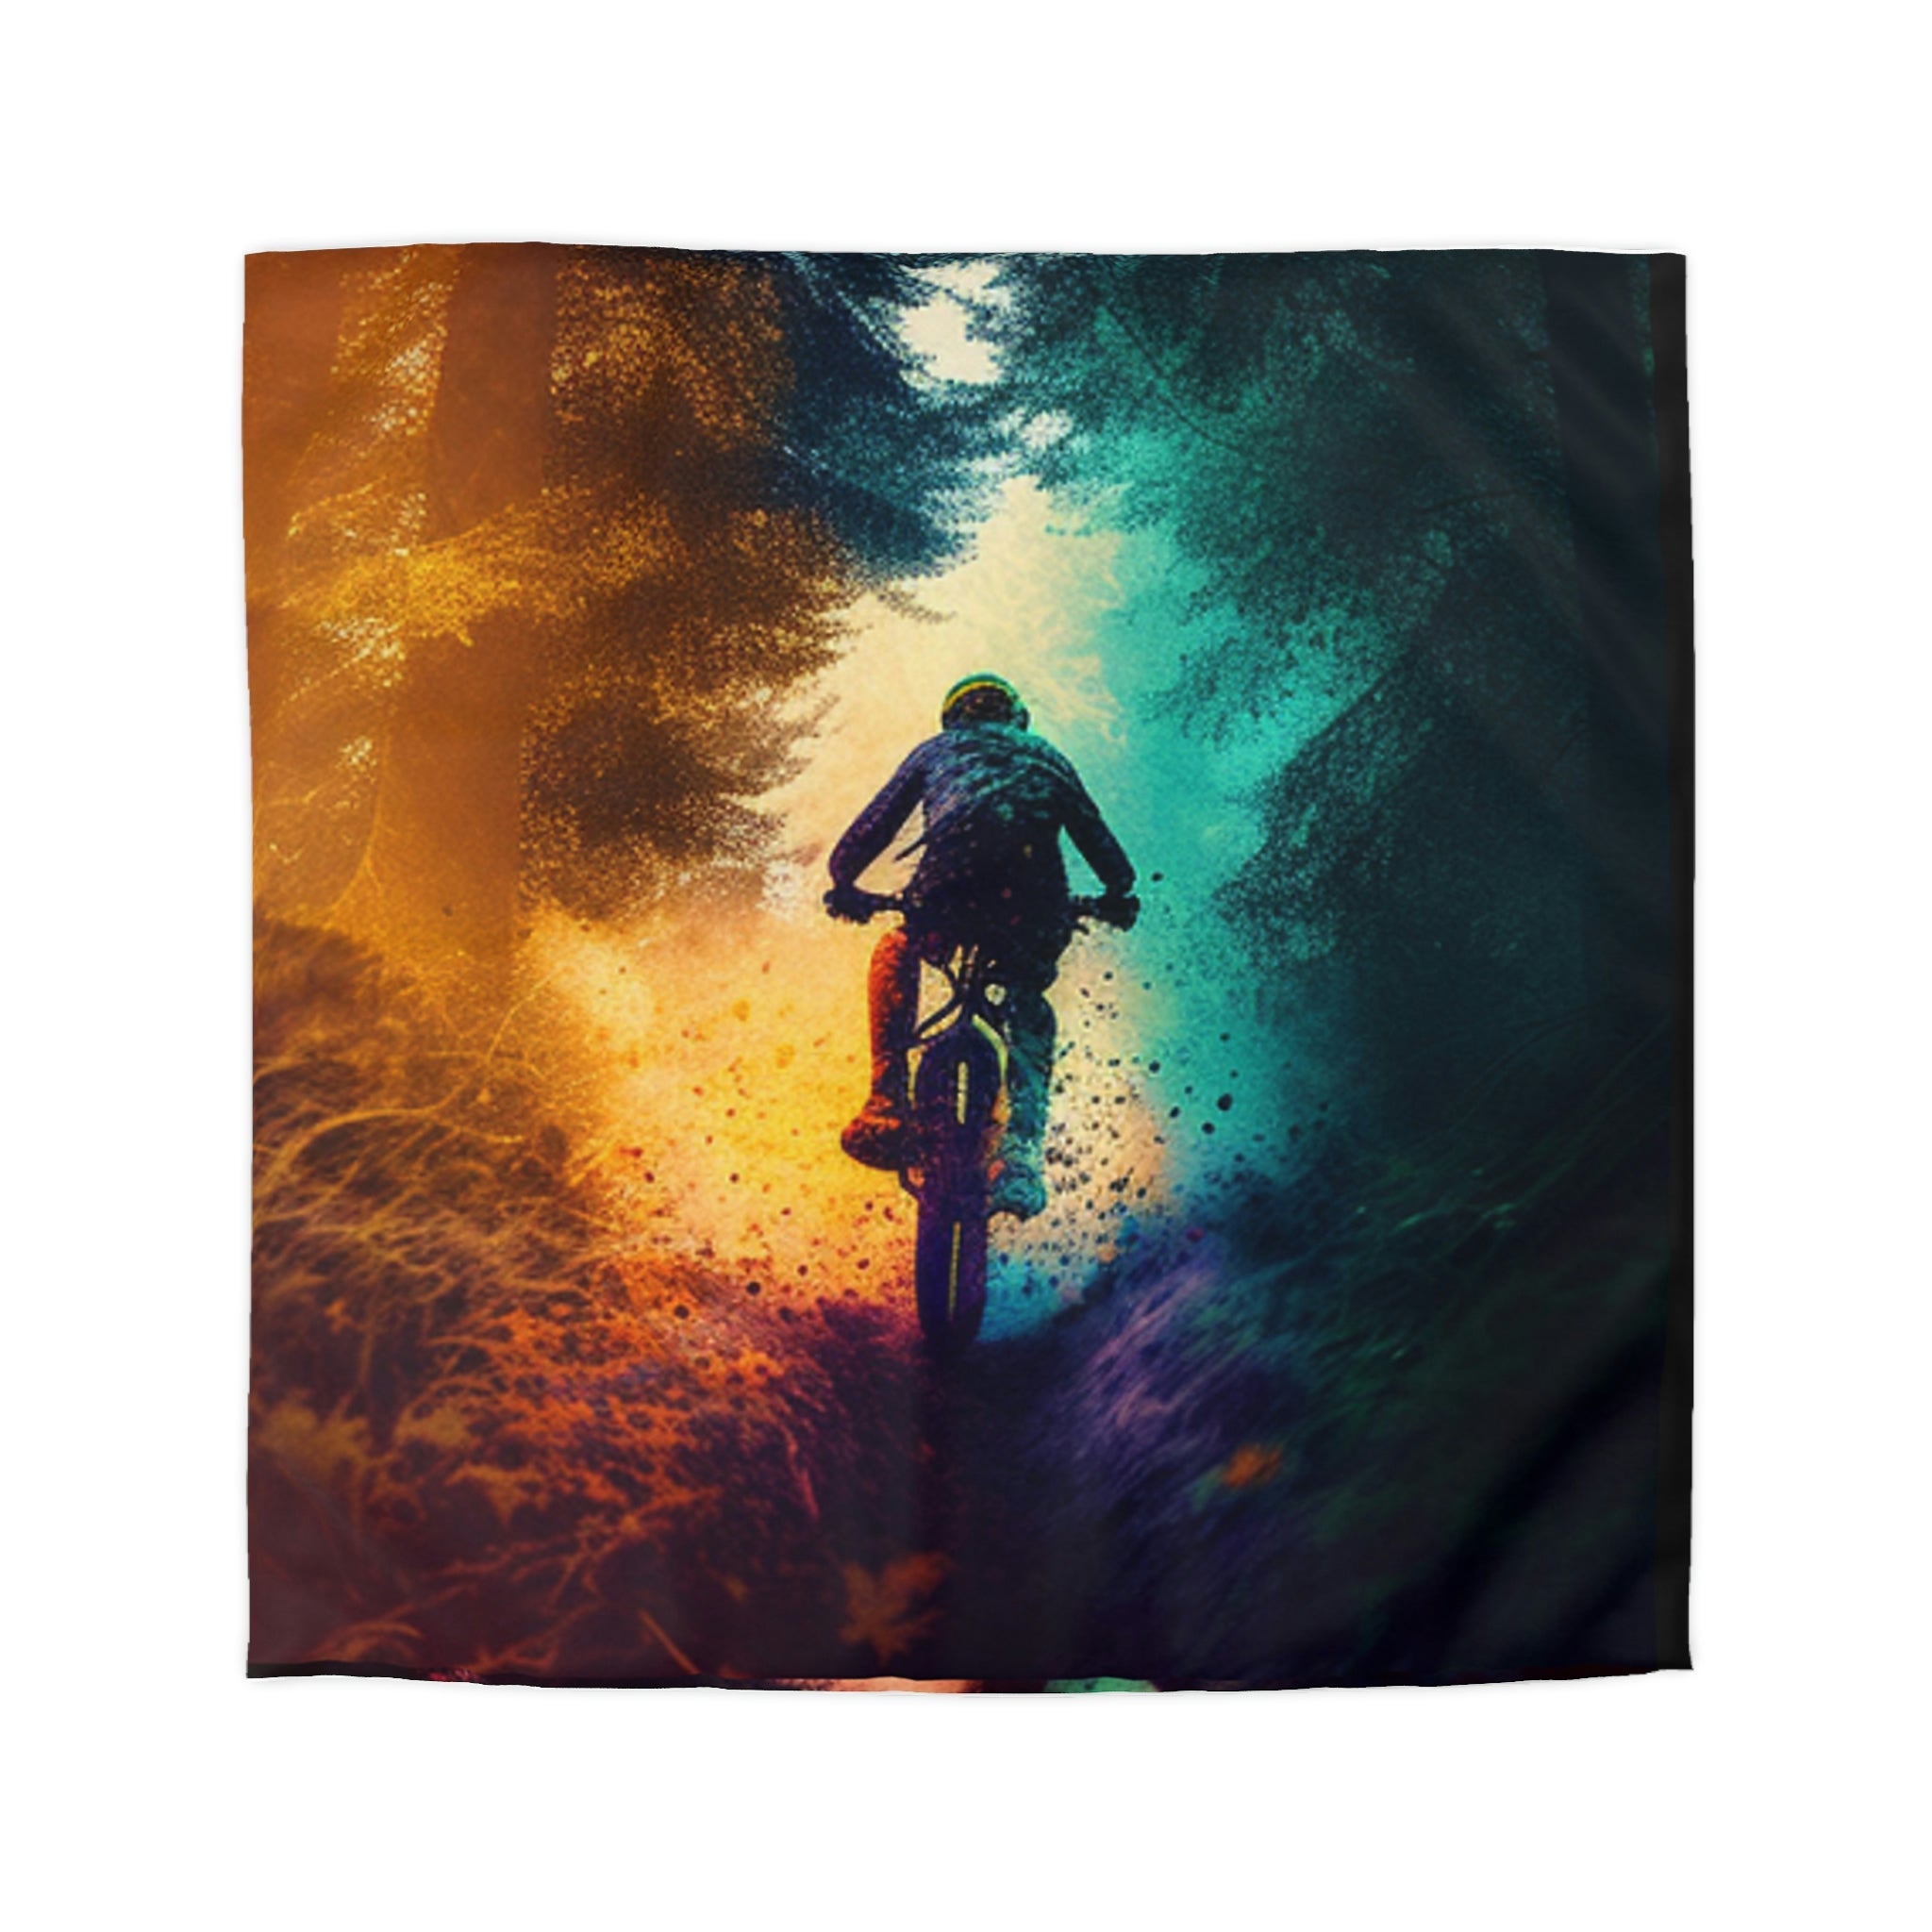 QUILT COVER | MOUNTAIN BIKER IN FOREST | 3 SIZES - Single Track Dreamer